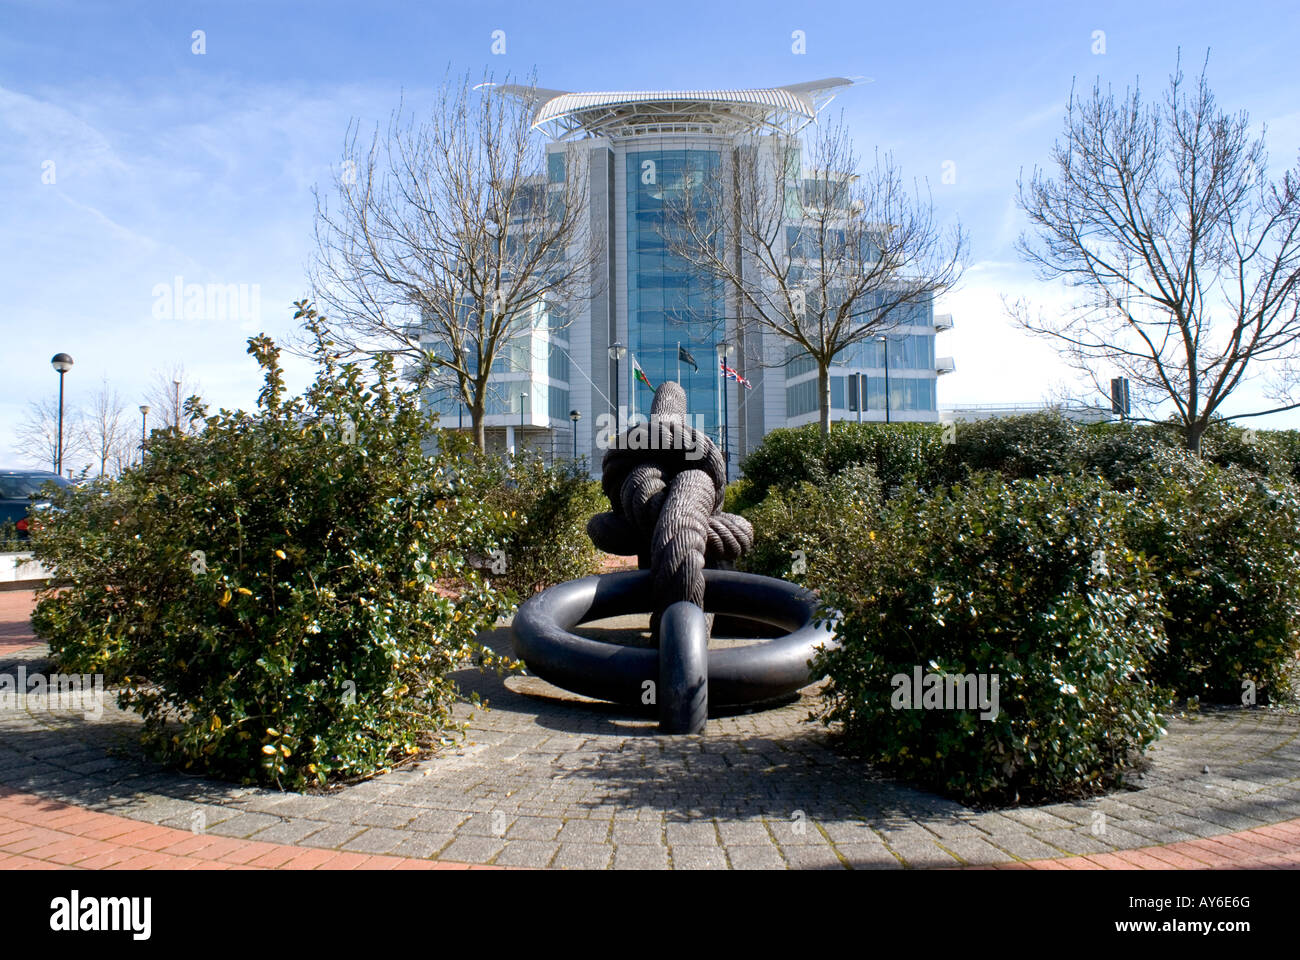 Sculpture of rope and St Davids Spa and hotel, Cardiff Bay, Cardiff, Wales. Stock Photo